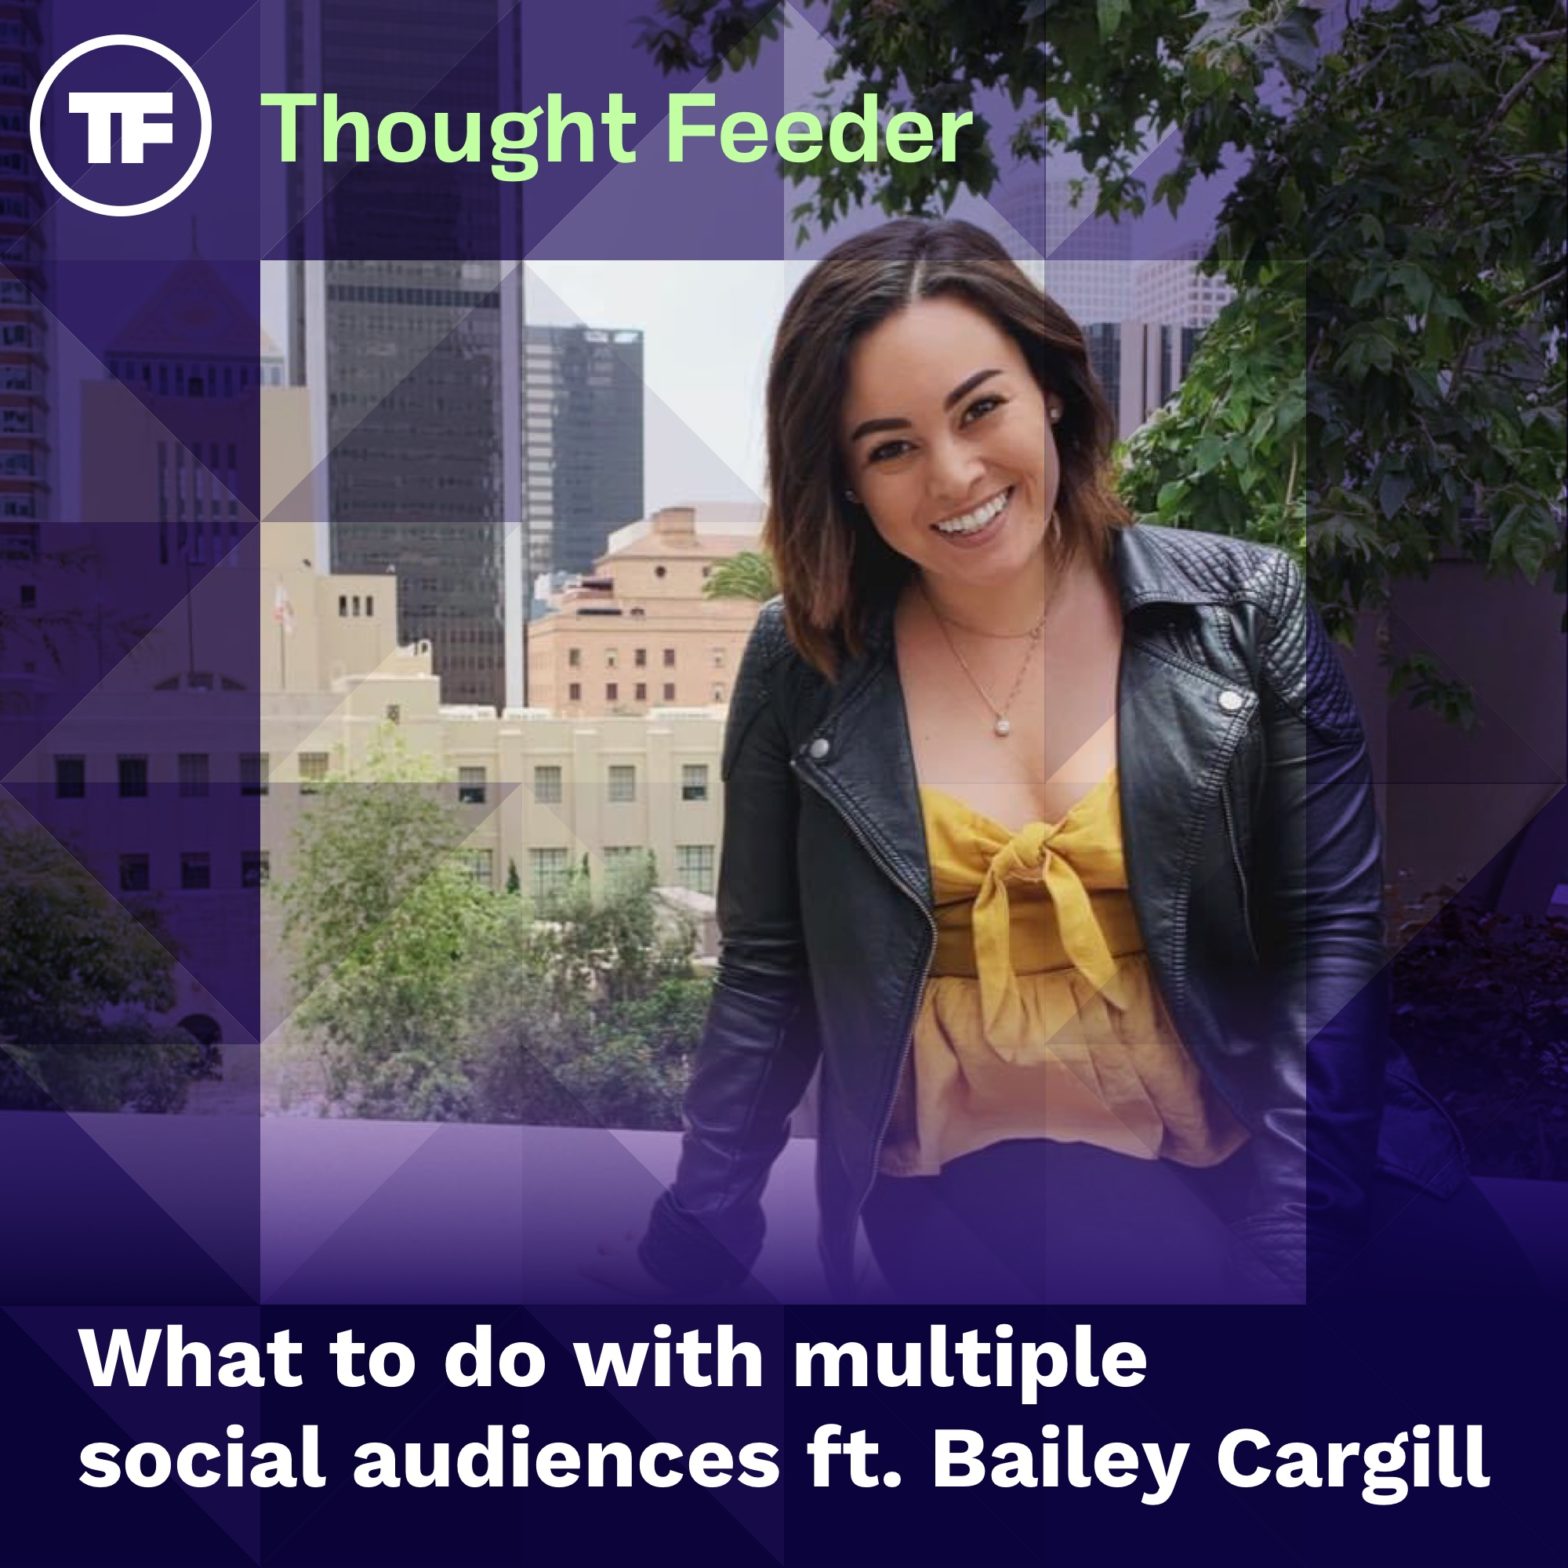 What to do with multiple social audiences ft. Bailey Cargill